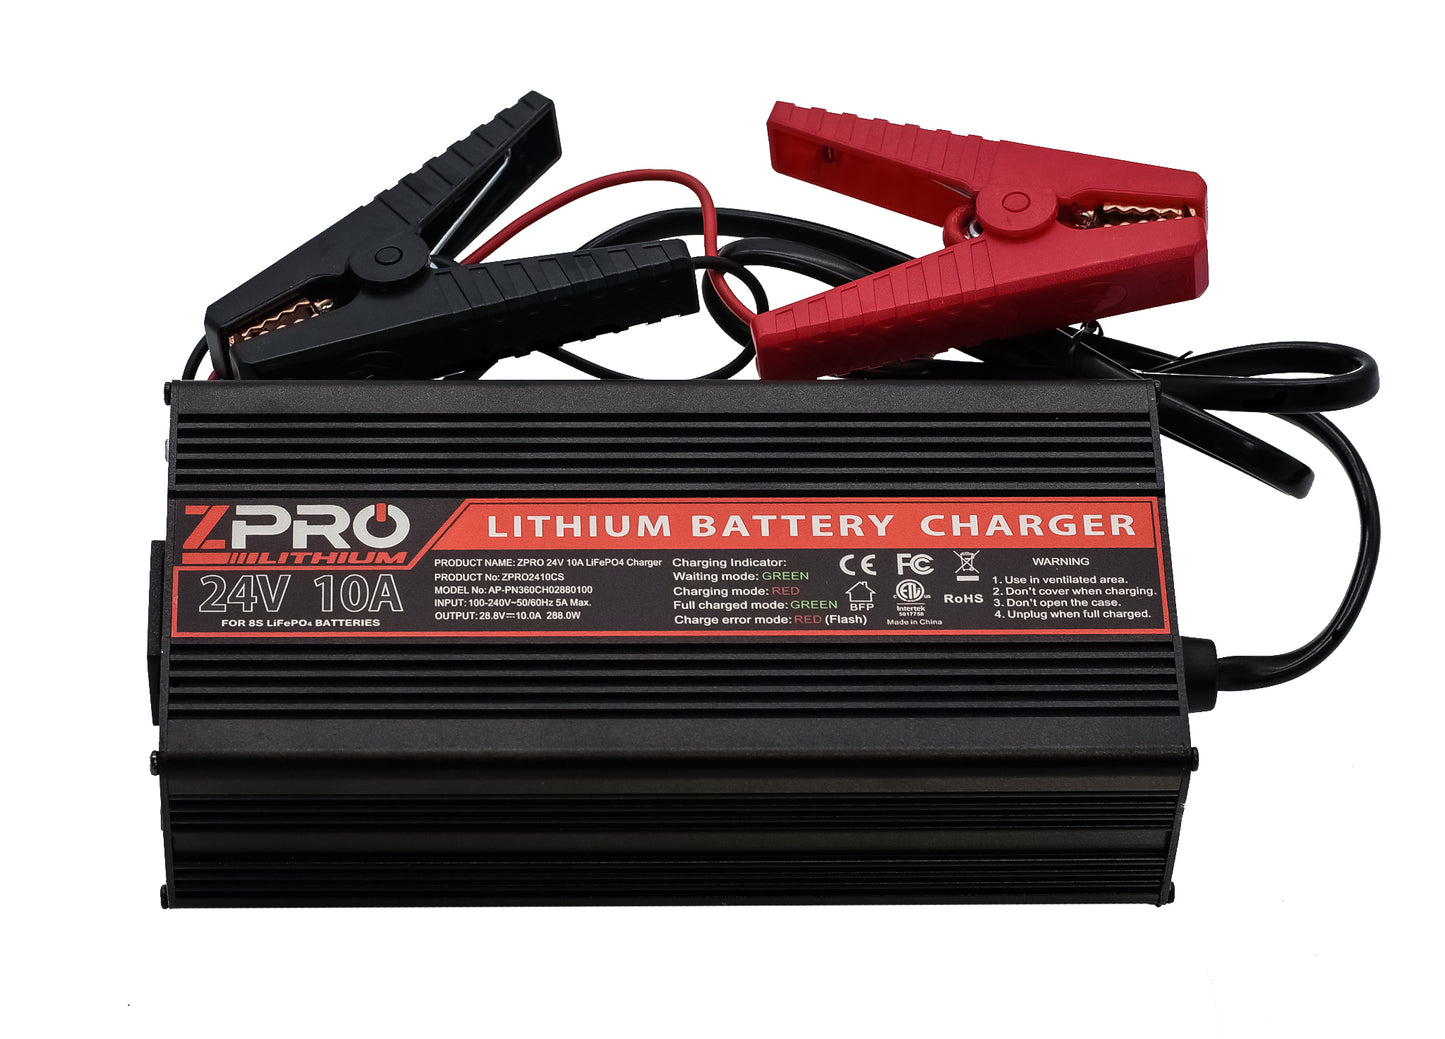 24V10A LITHIUM CHARGER